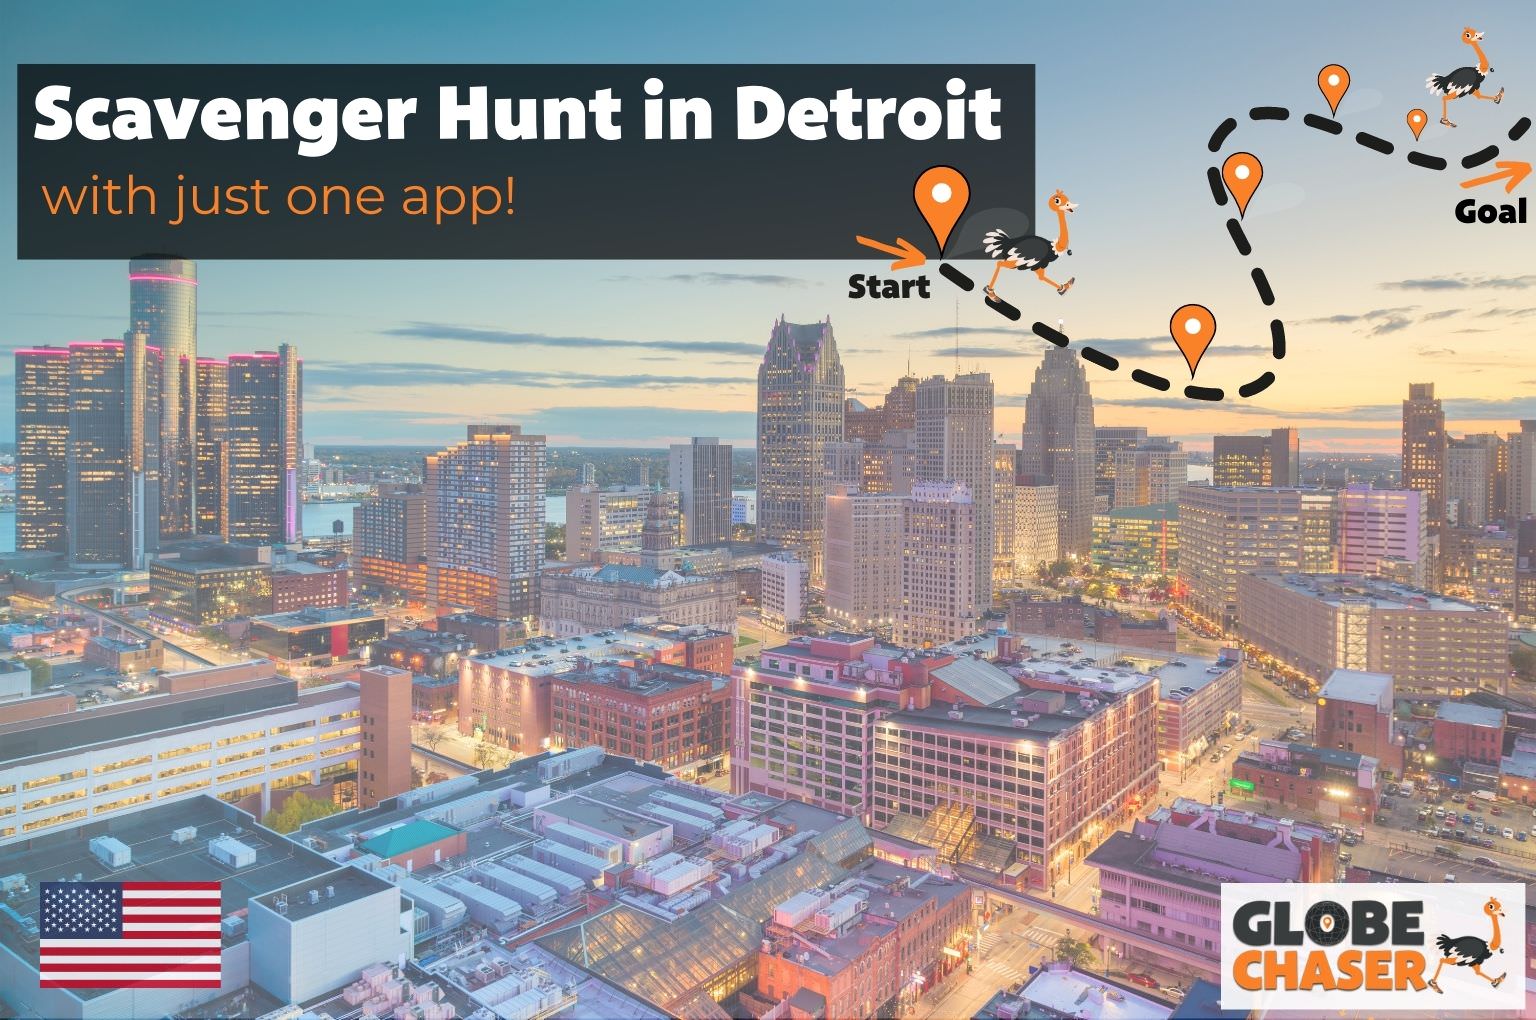 Scavenger Hunt in Detroit, USA - Family Activities with the Globe Chaser App for Outdoor Fun